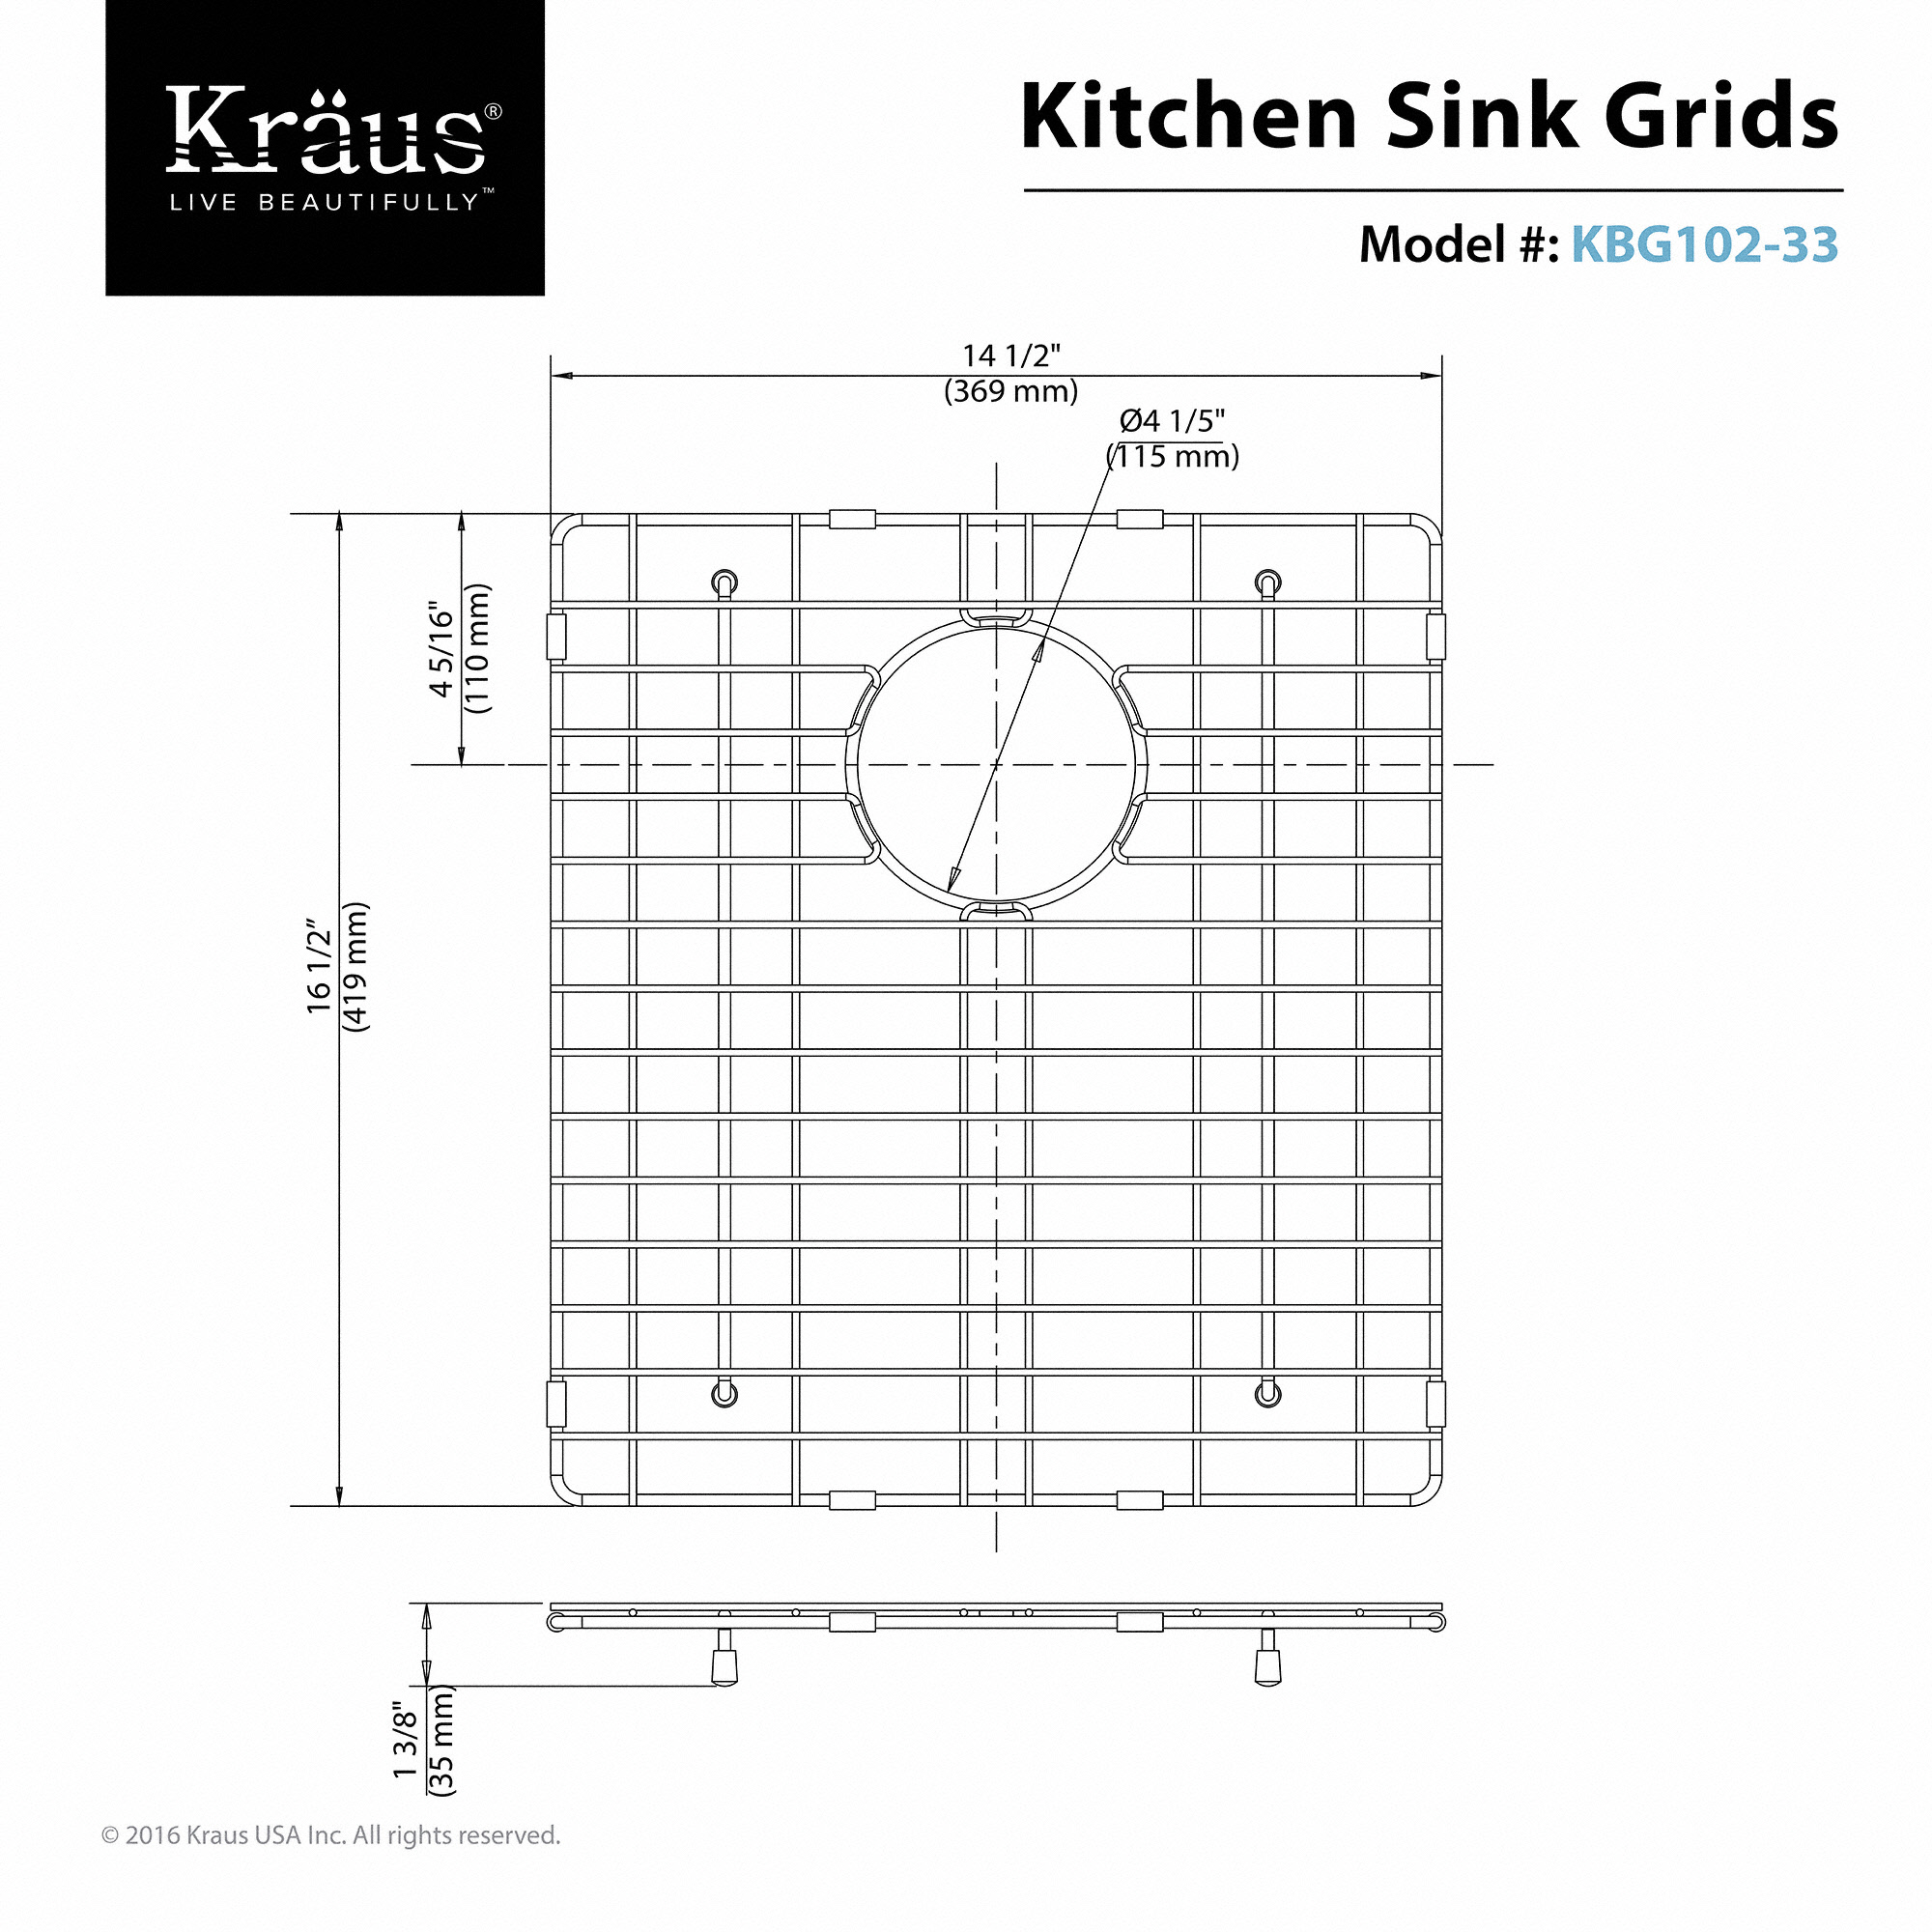 KRAUS KBG-102-33 Stainless Steel Bottom Grid for KHU102-33 Double Bowl 33? Kitchen Sink, 14 1/2? x 16 1/2? x 1 3/8? - image 2 of 2